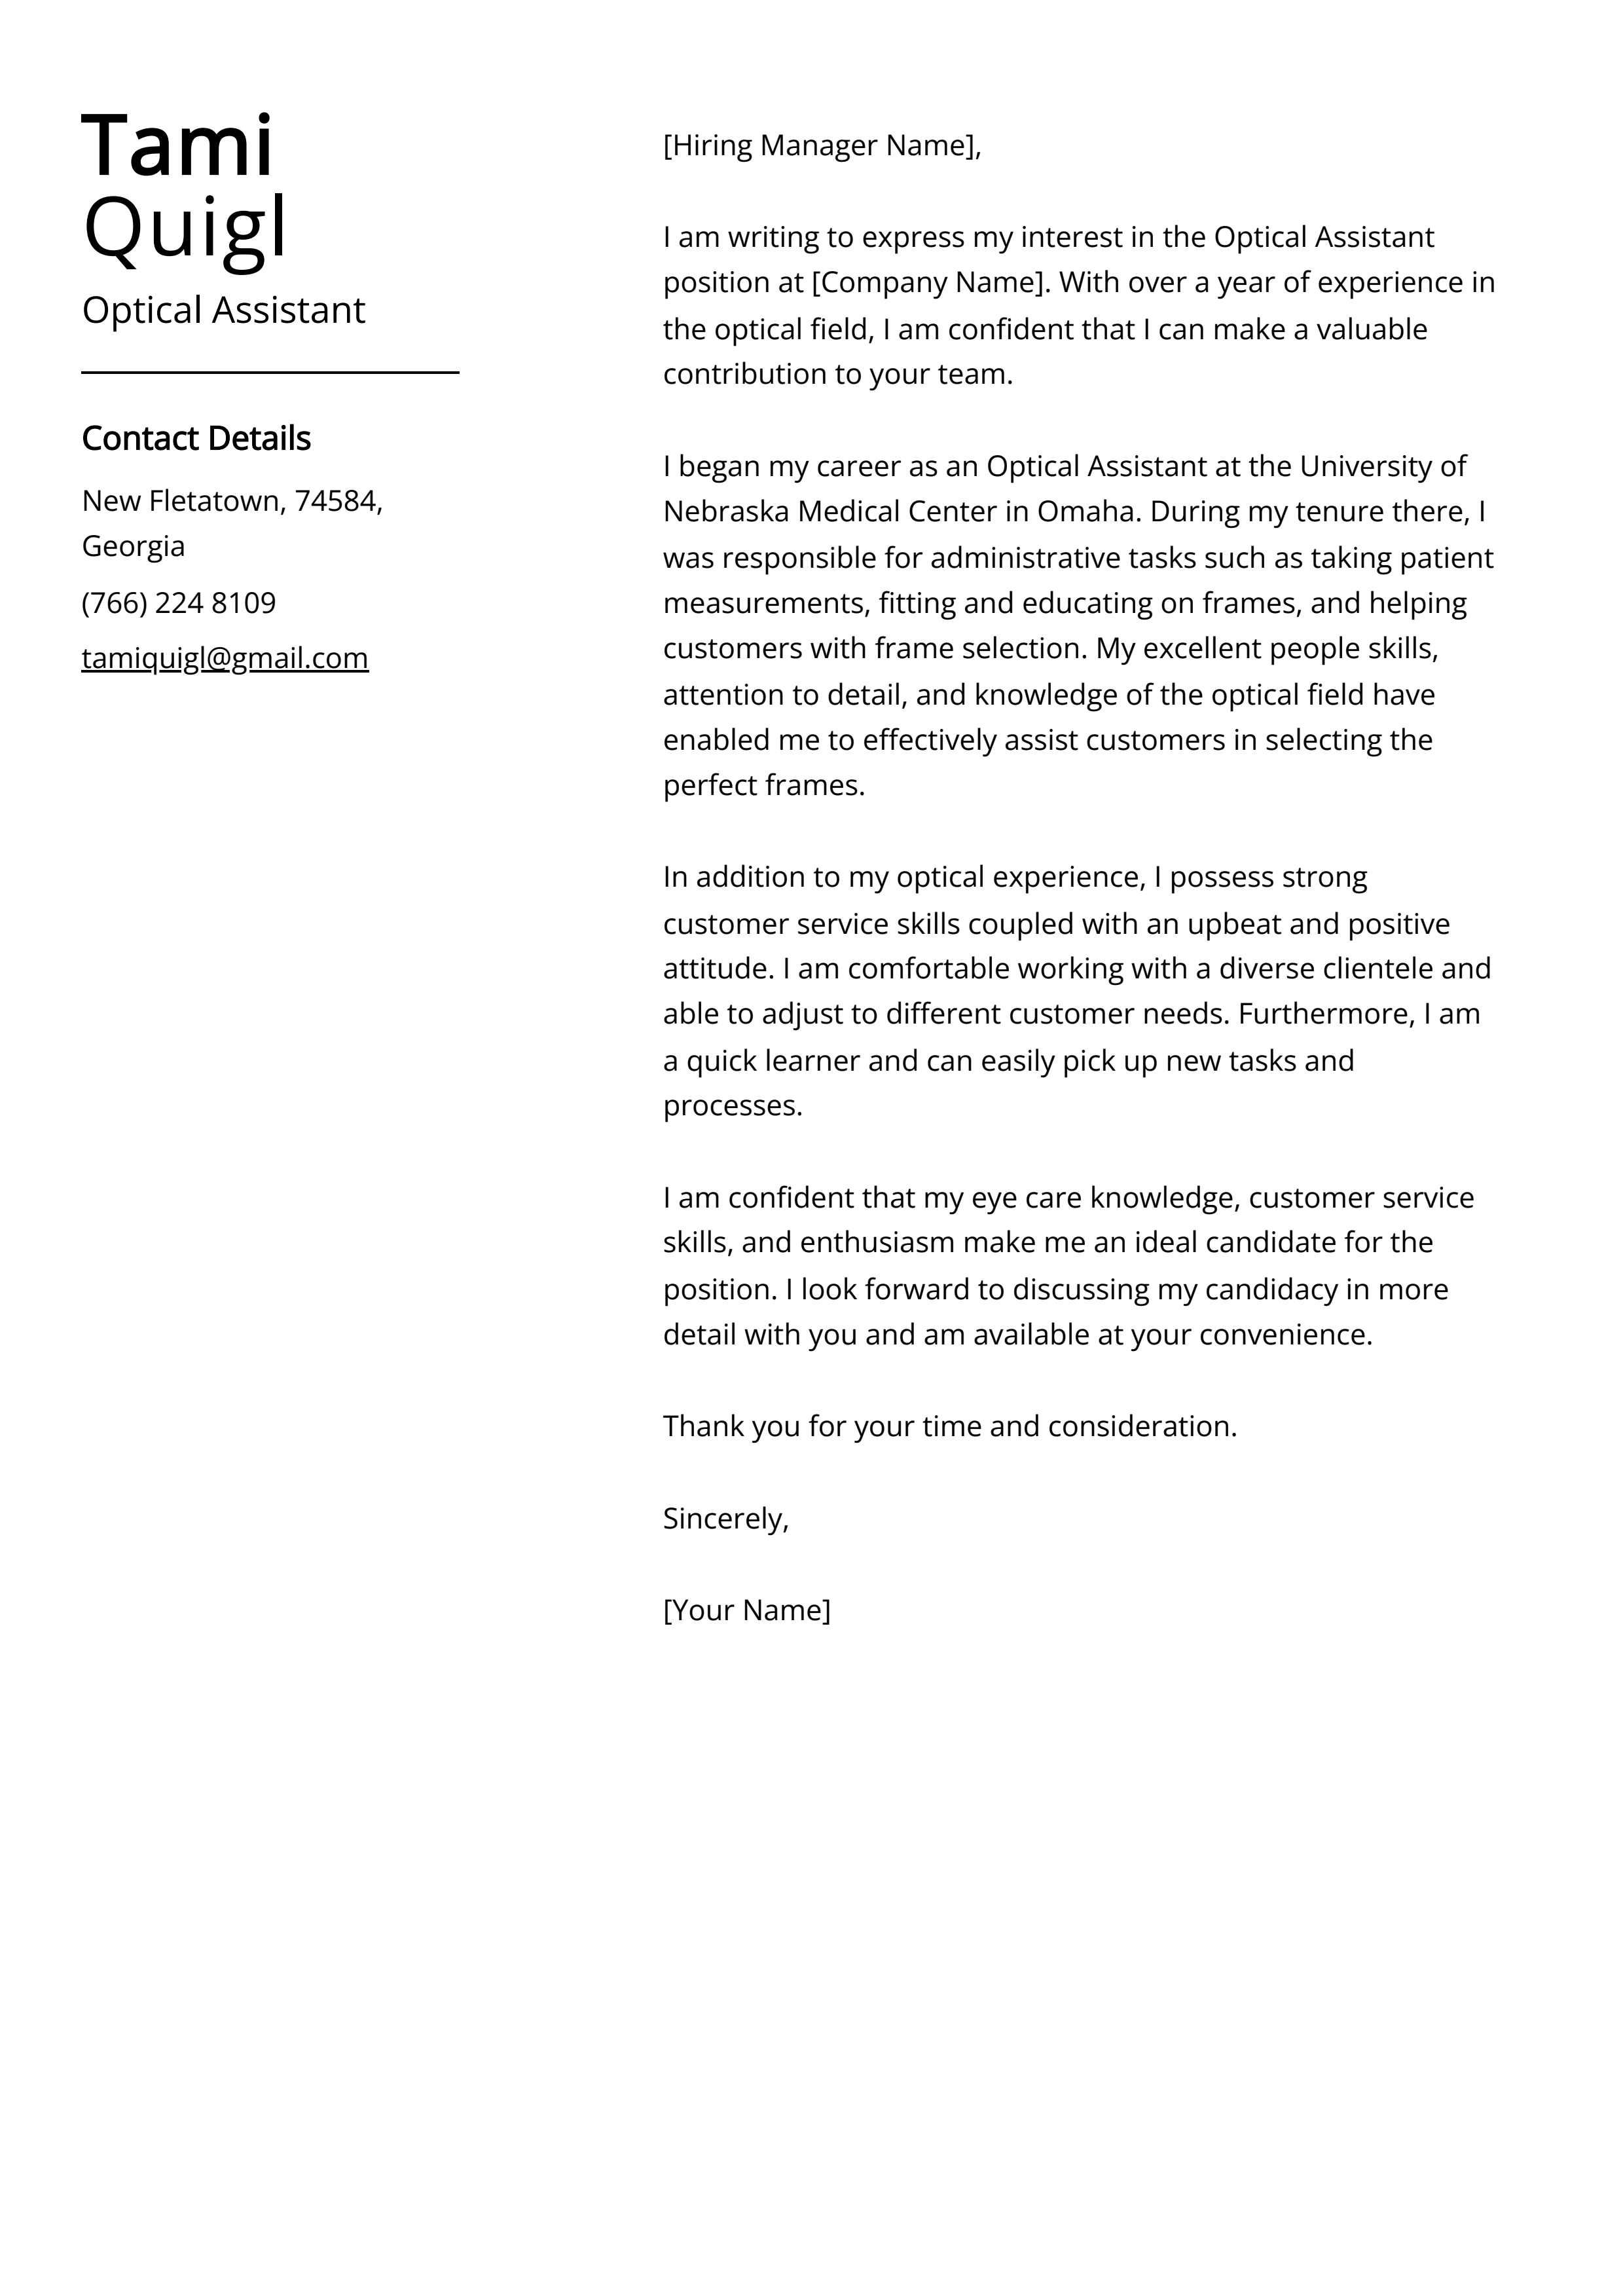 Optical Assistant Cover Letter Example